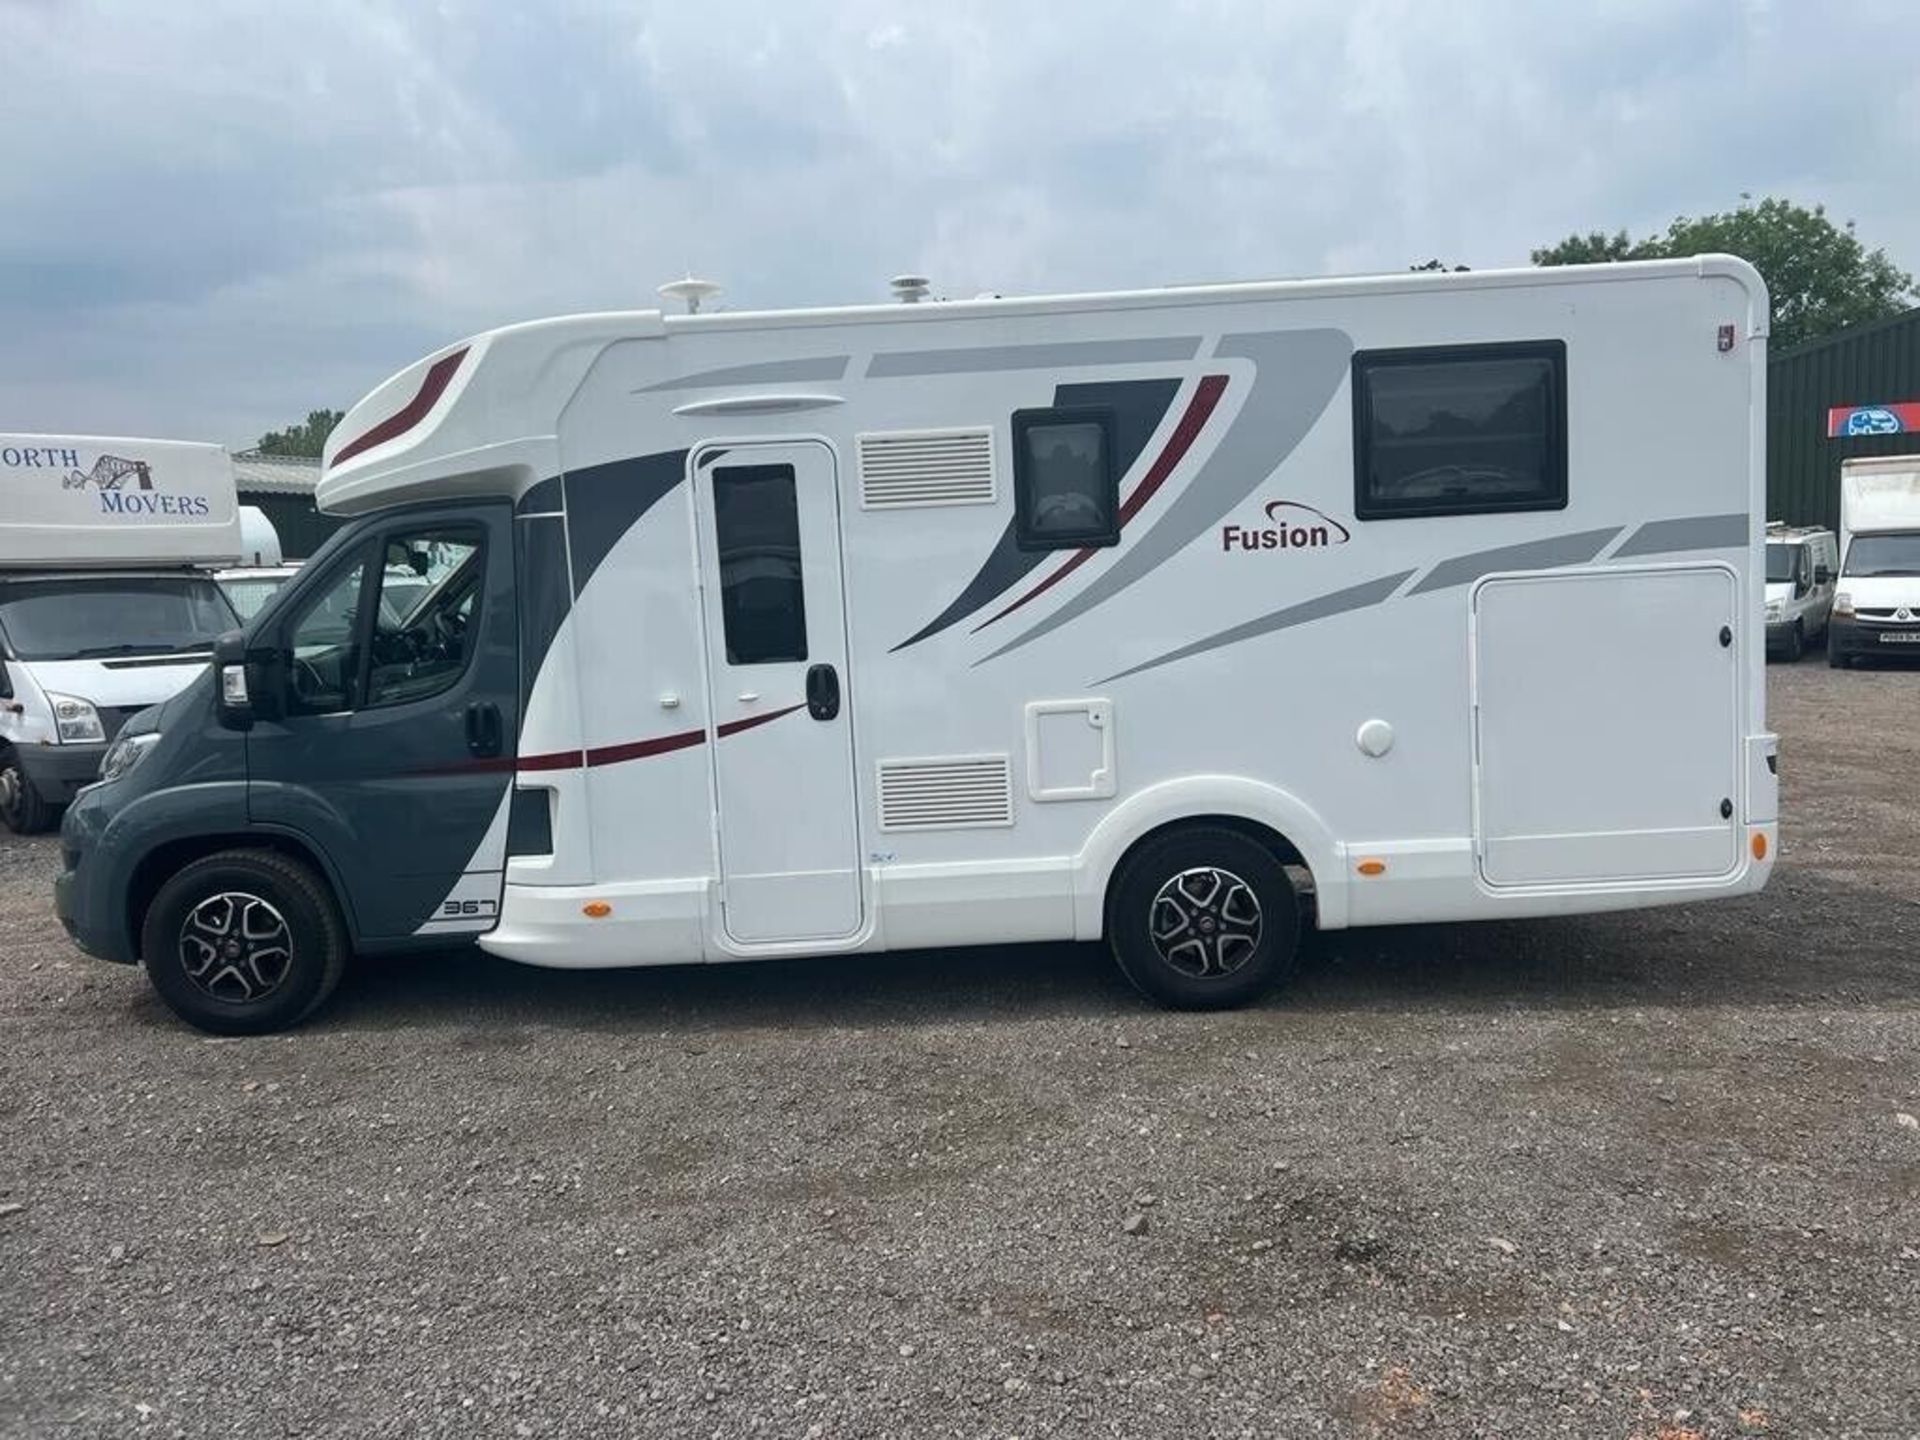 72 PLATE - ONLY 750 MILES! FIAT MCLOUIS FUSION 367: IMMACULATE MOTORHOME JOY >NO VAT ON HAMMER< - Image 11 of 15